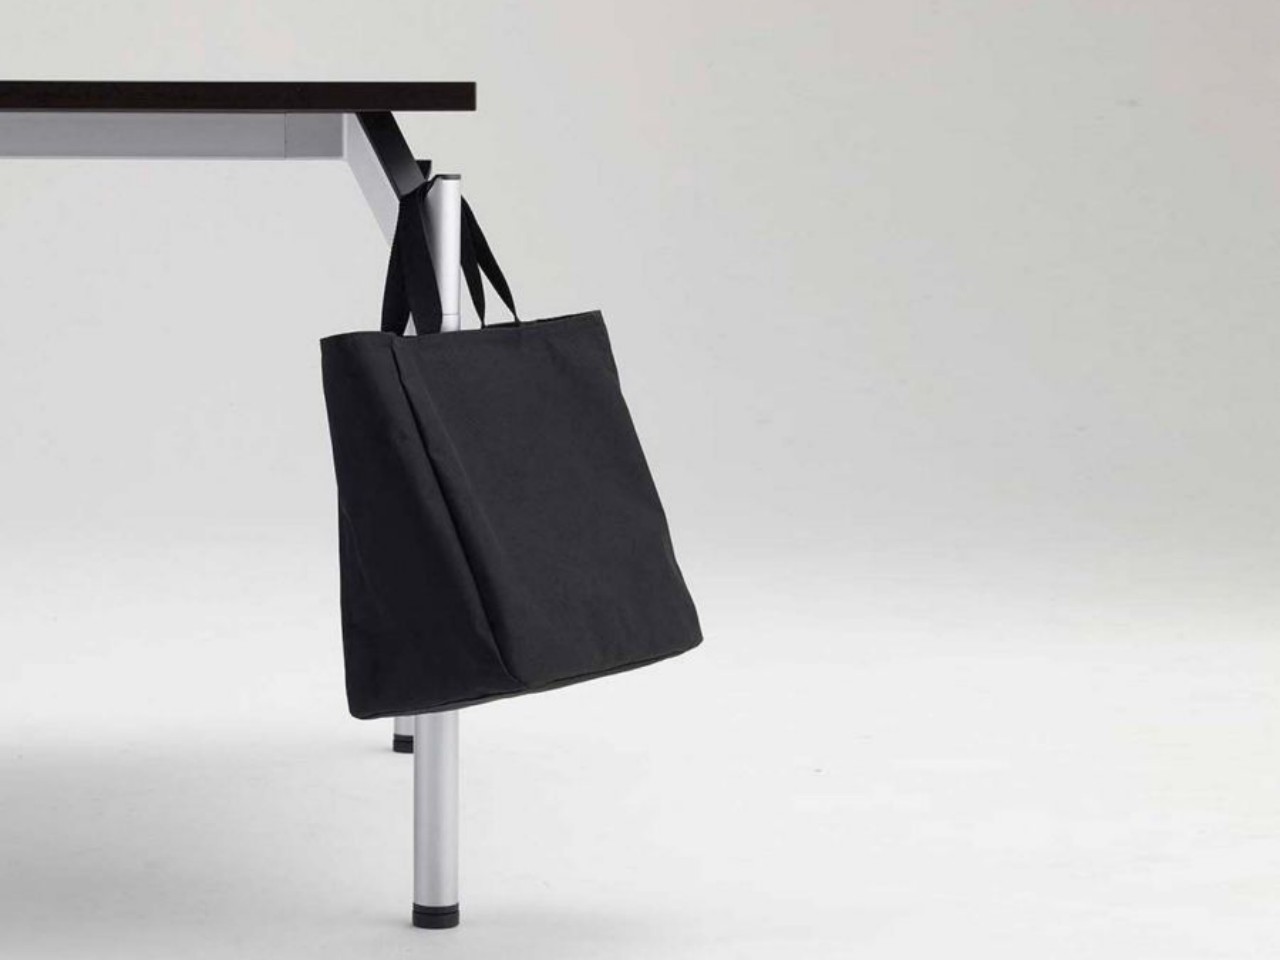 This simple table has an equally simple solution for hanging your bags